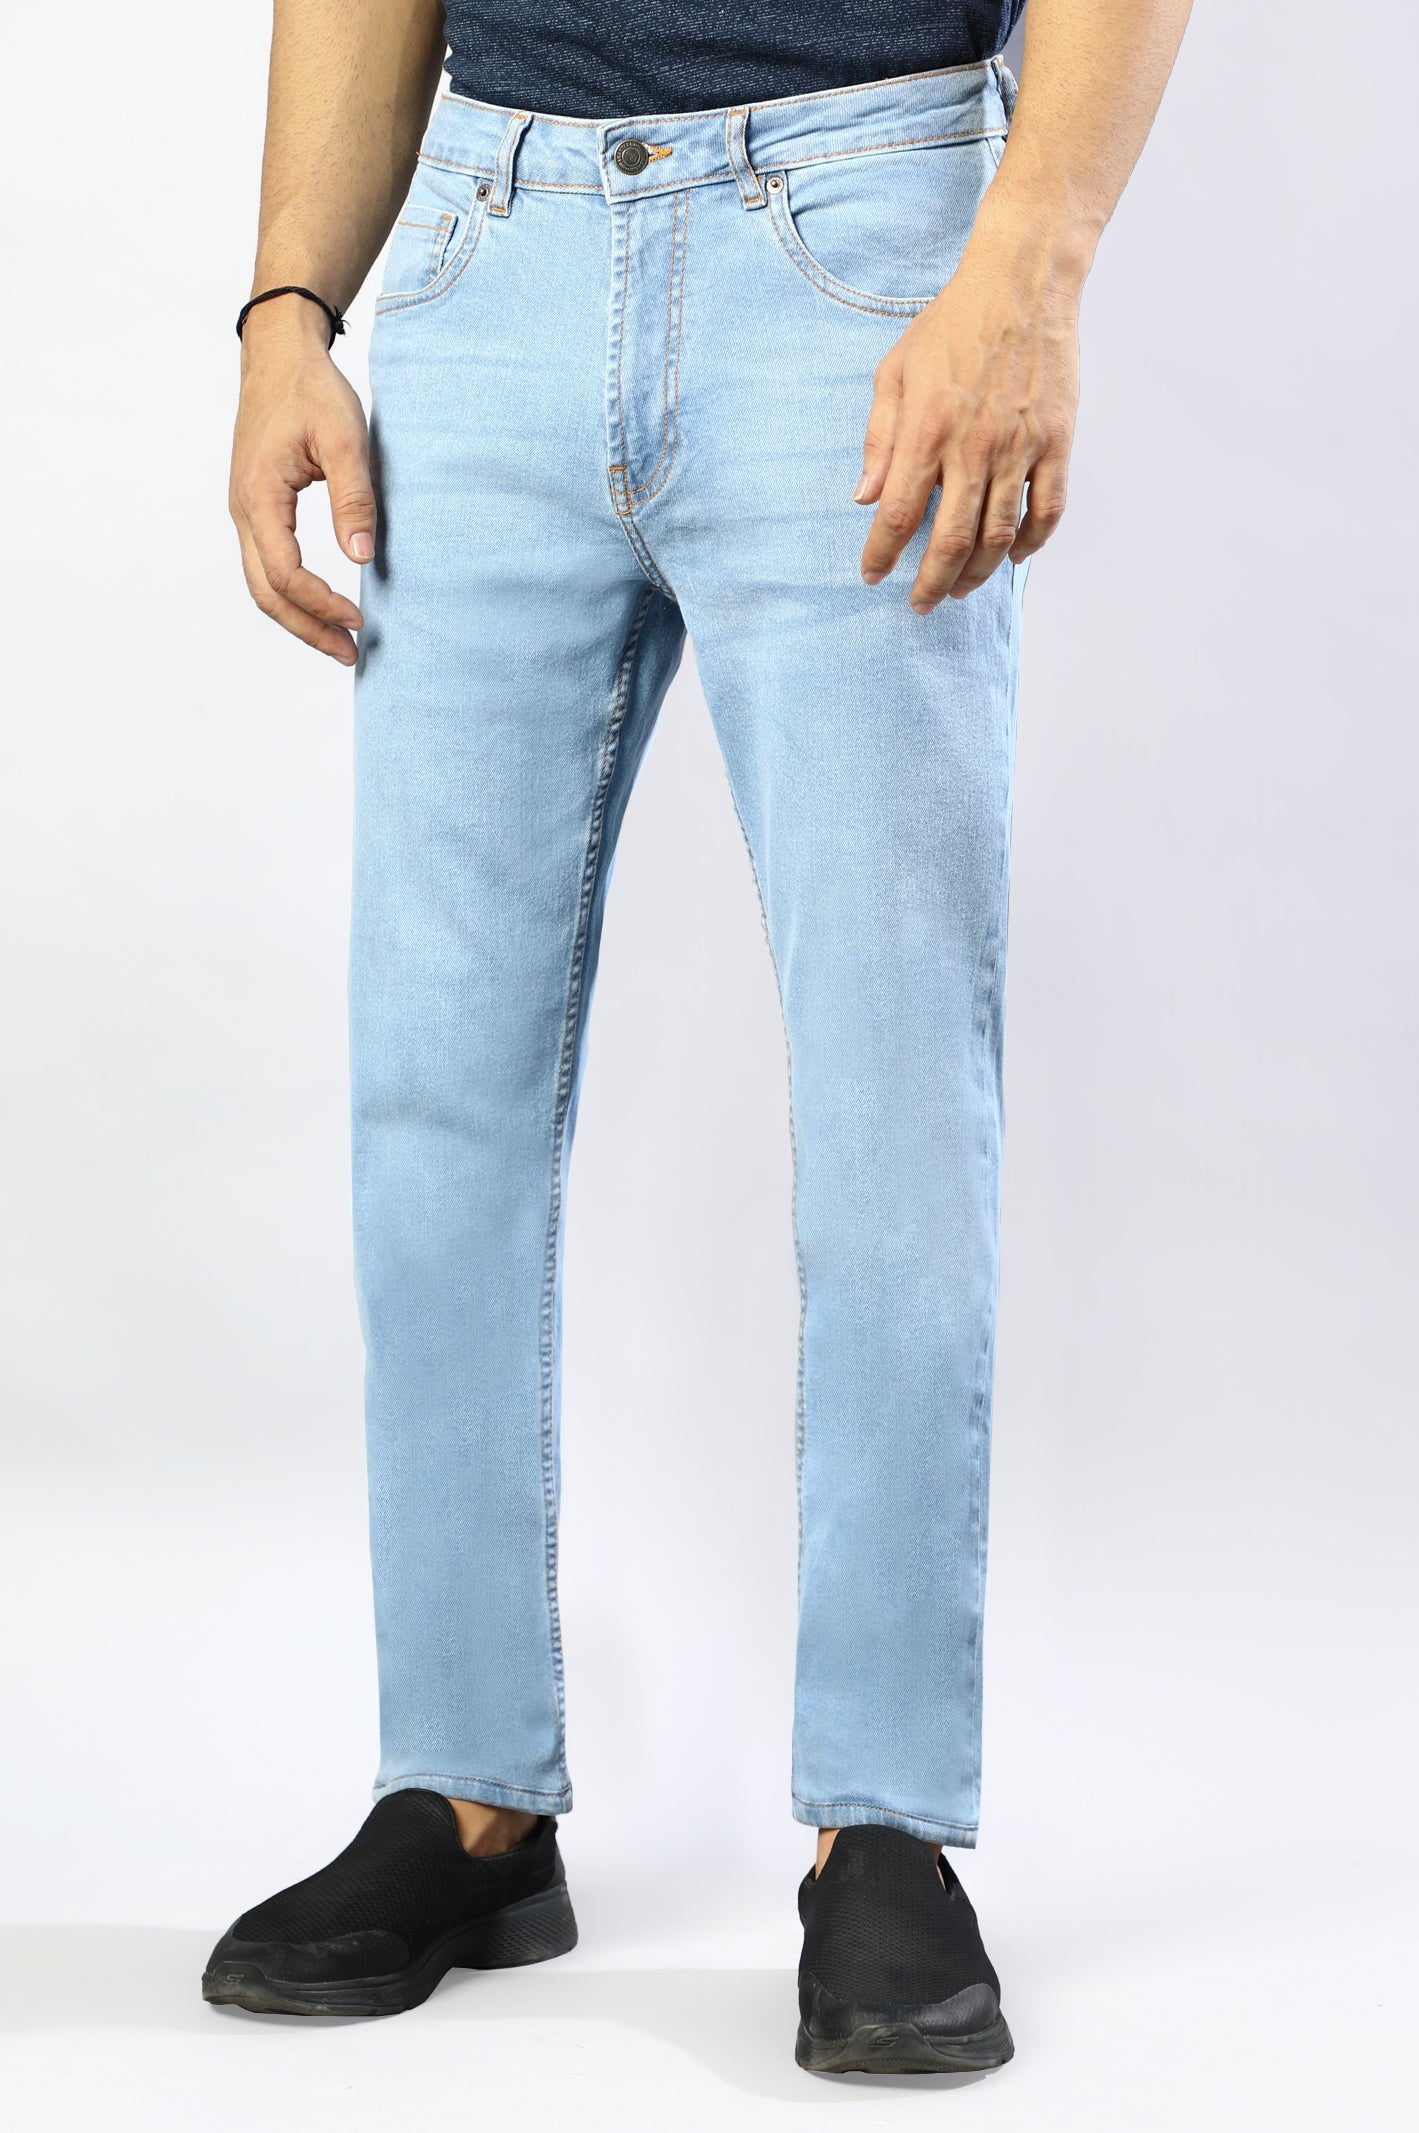 Light Blue Smart Fit Jeans From Diners